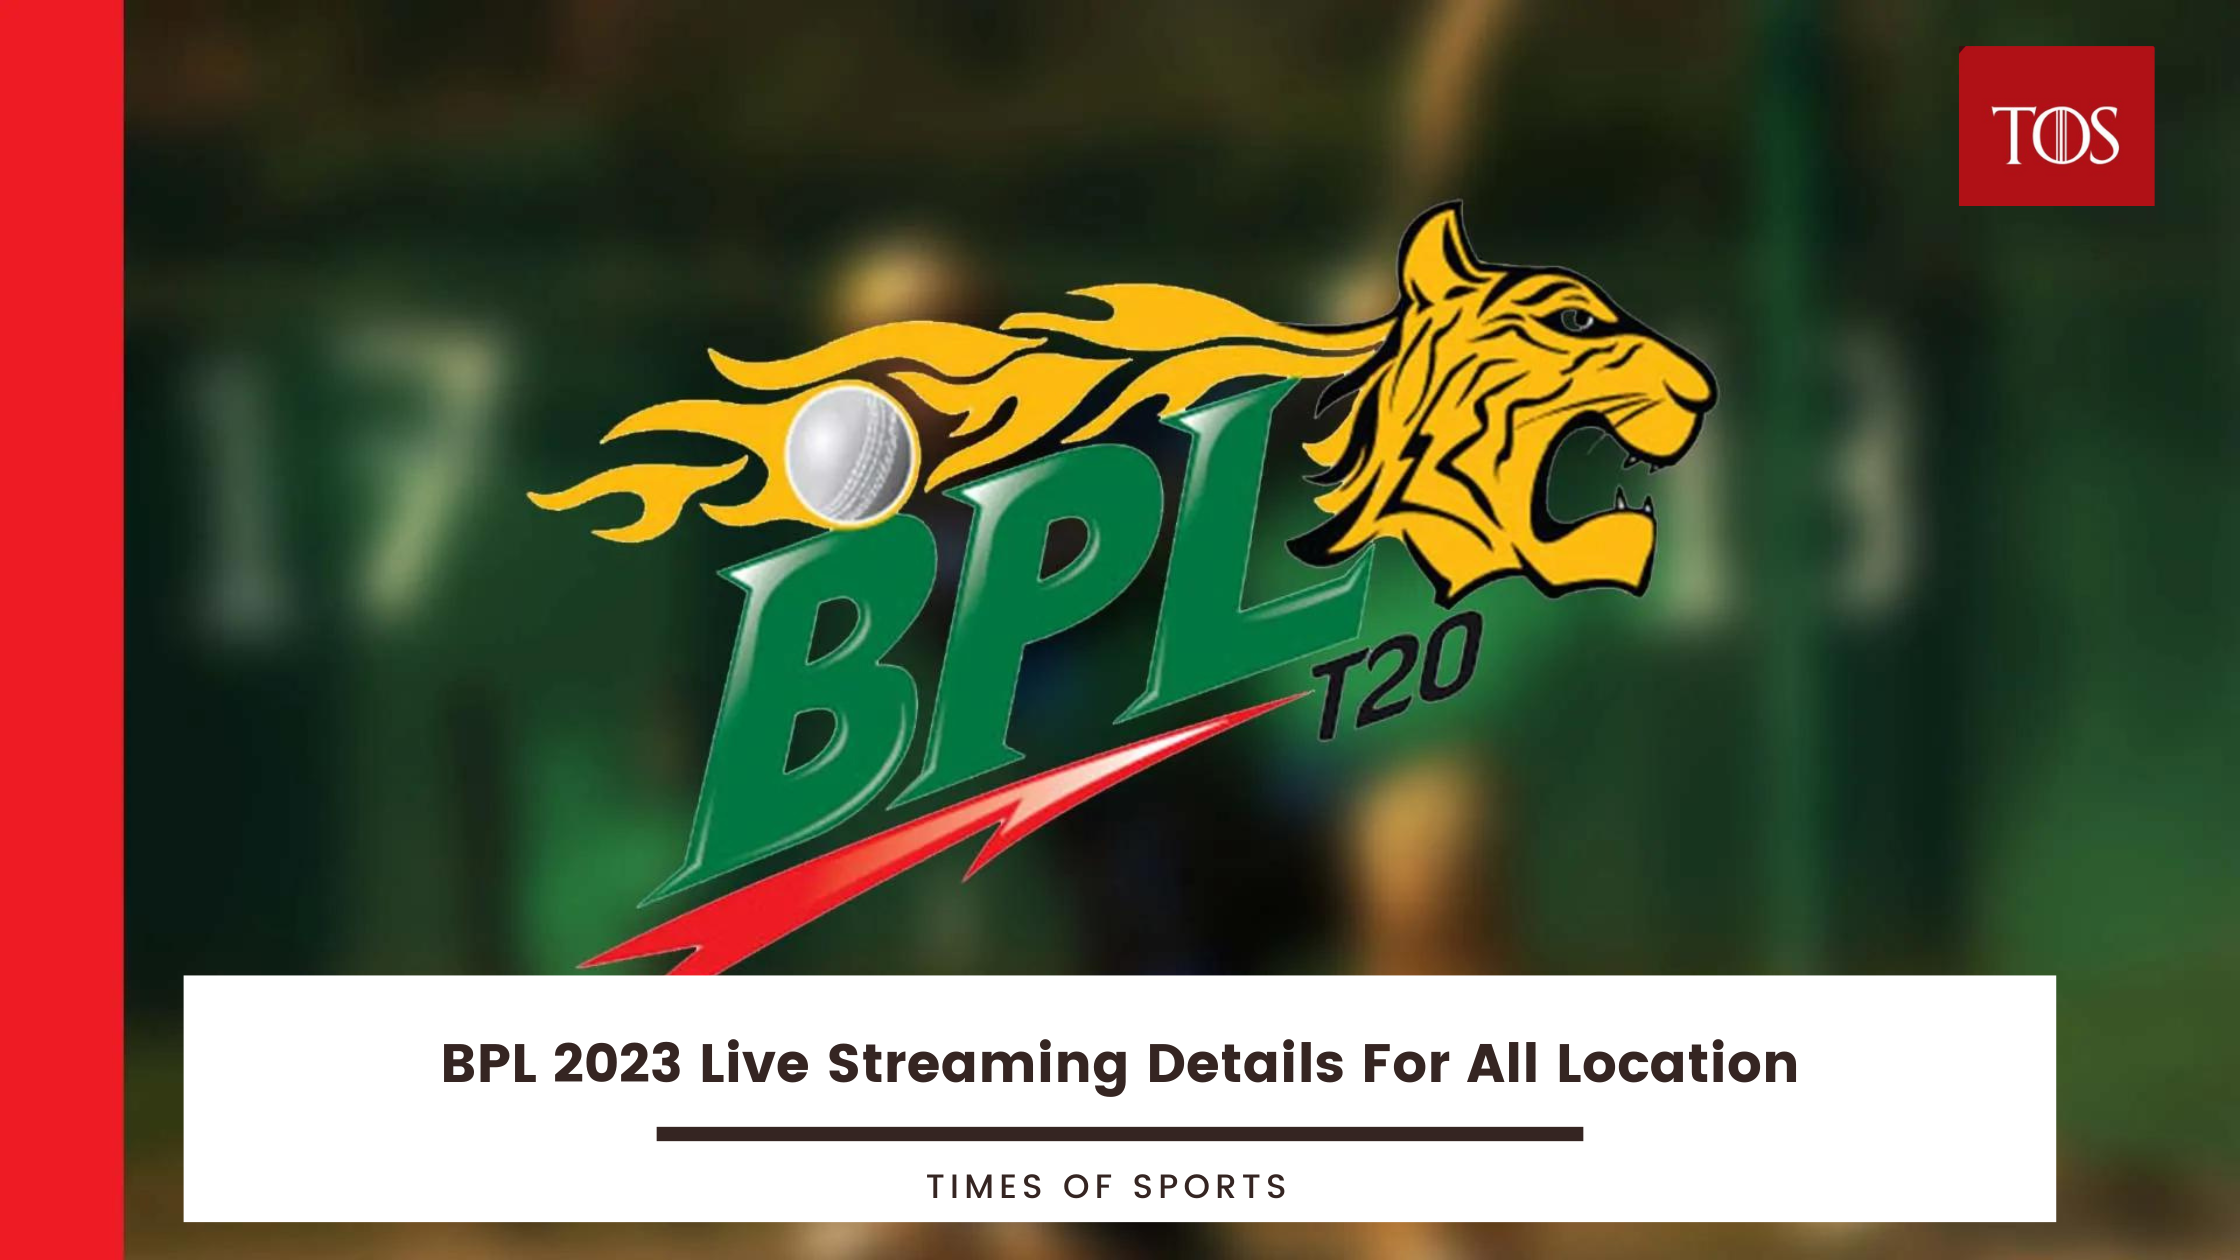 BPL 2023 Live Streaming Details For Your Location